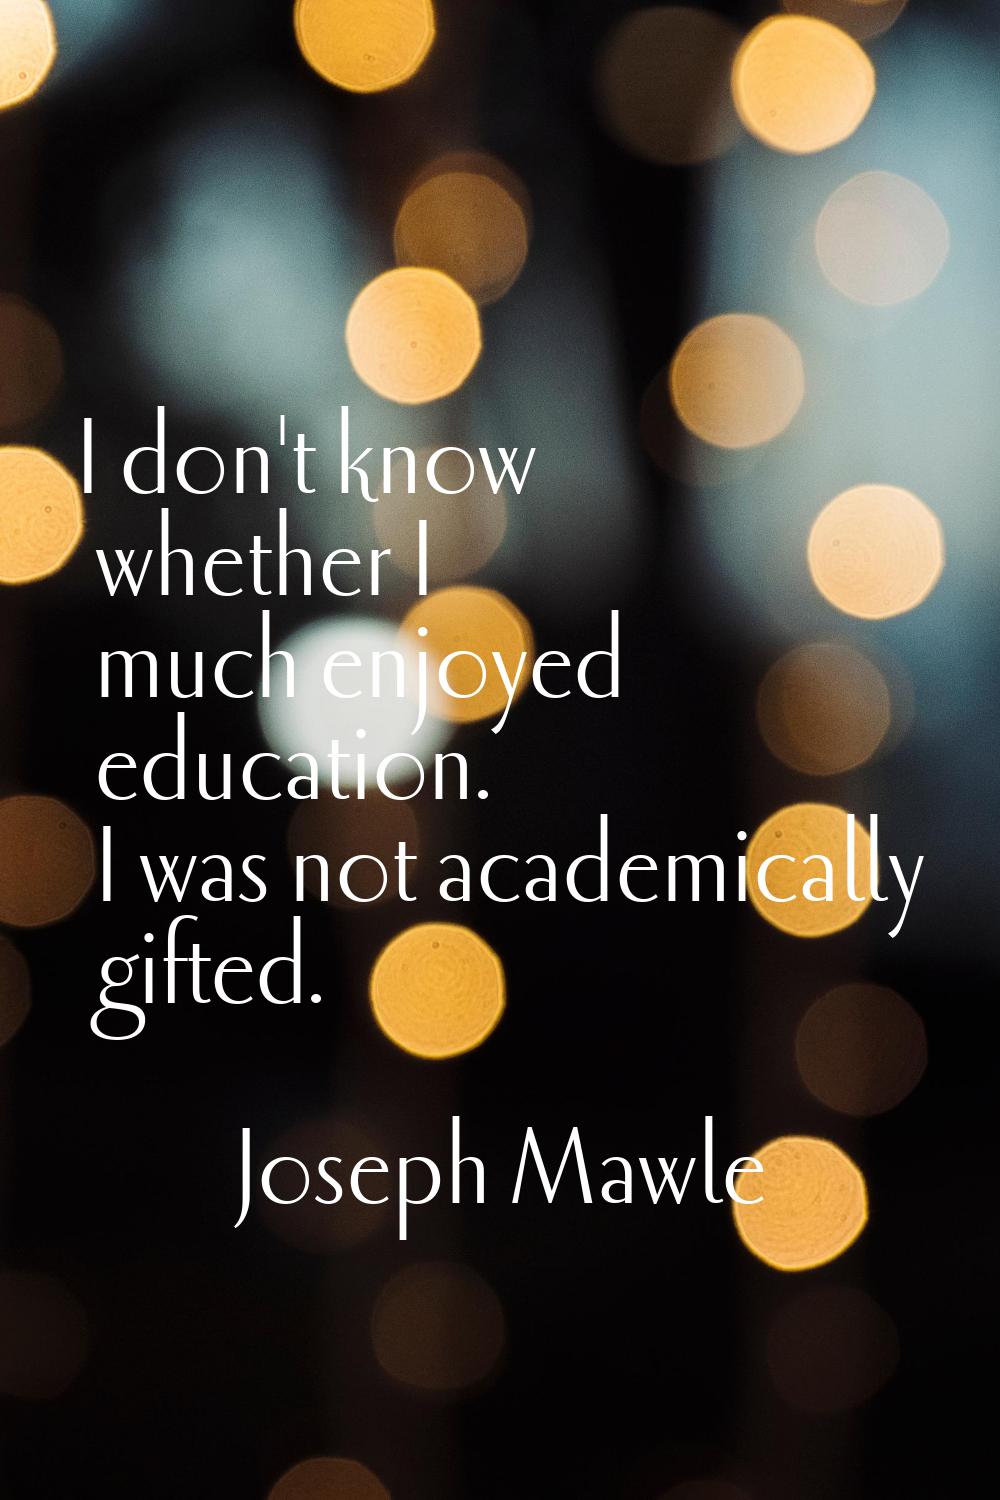 I don't know whether I much enjoyed education. I was not academically gifted.